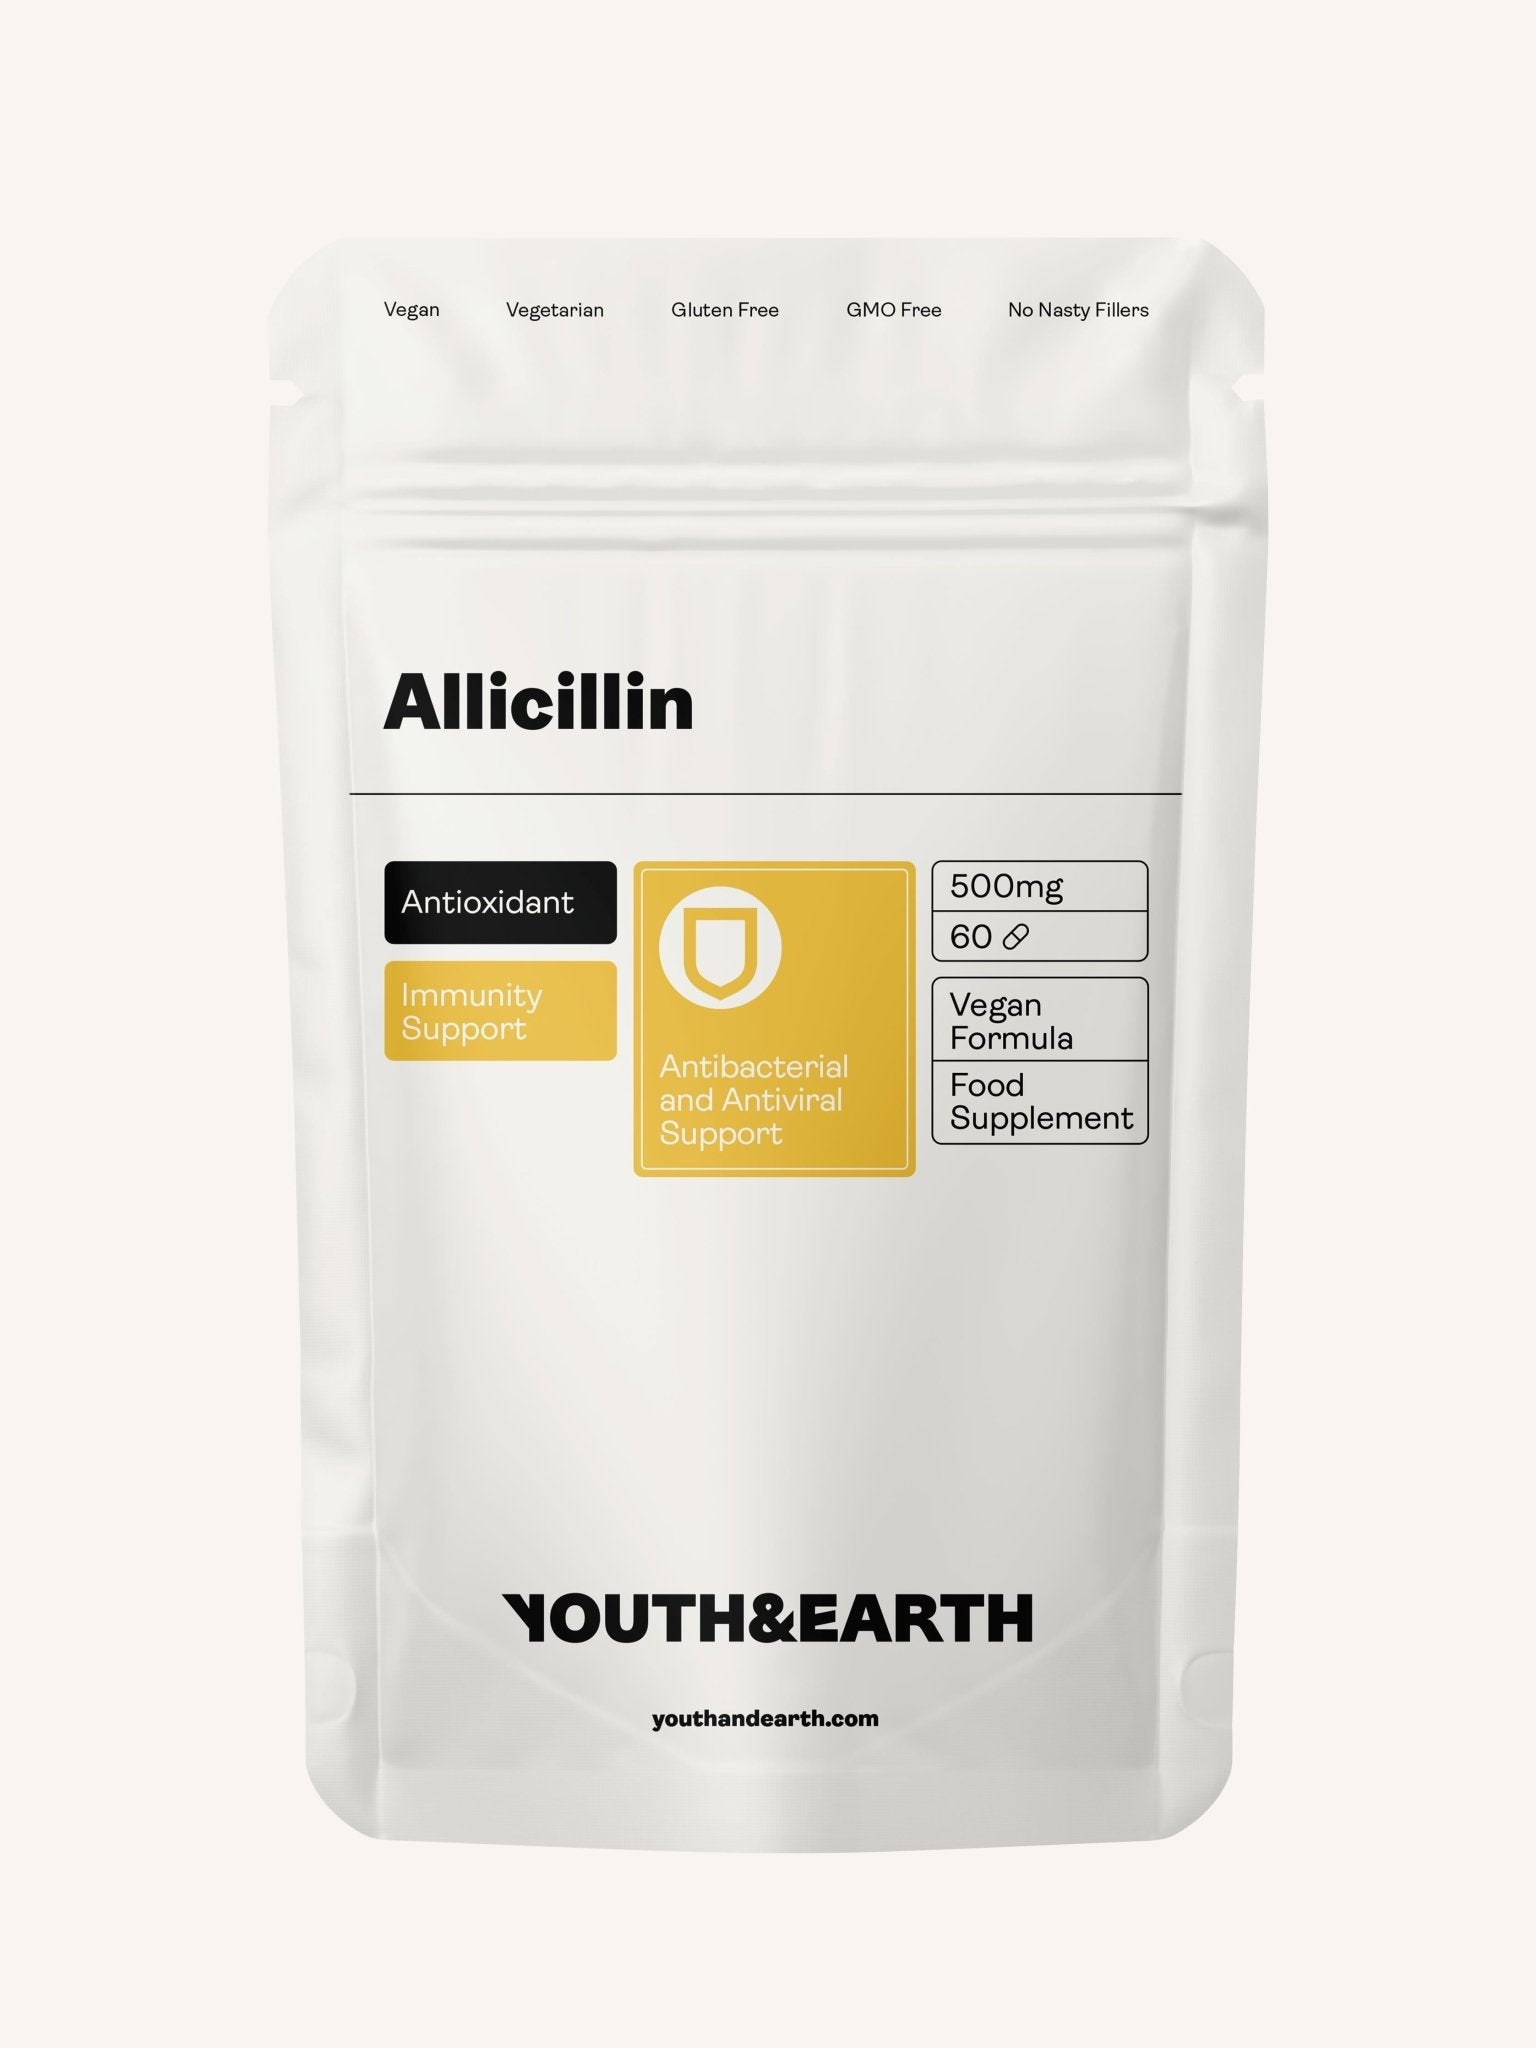 Allicillin Extra Strength 60 capsules (2 months supply) - Youth & Earth EU Store